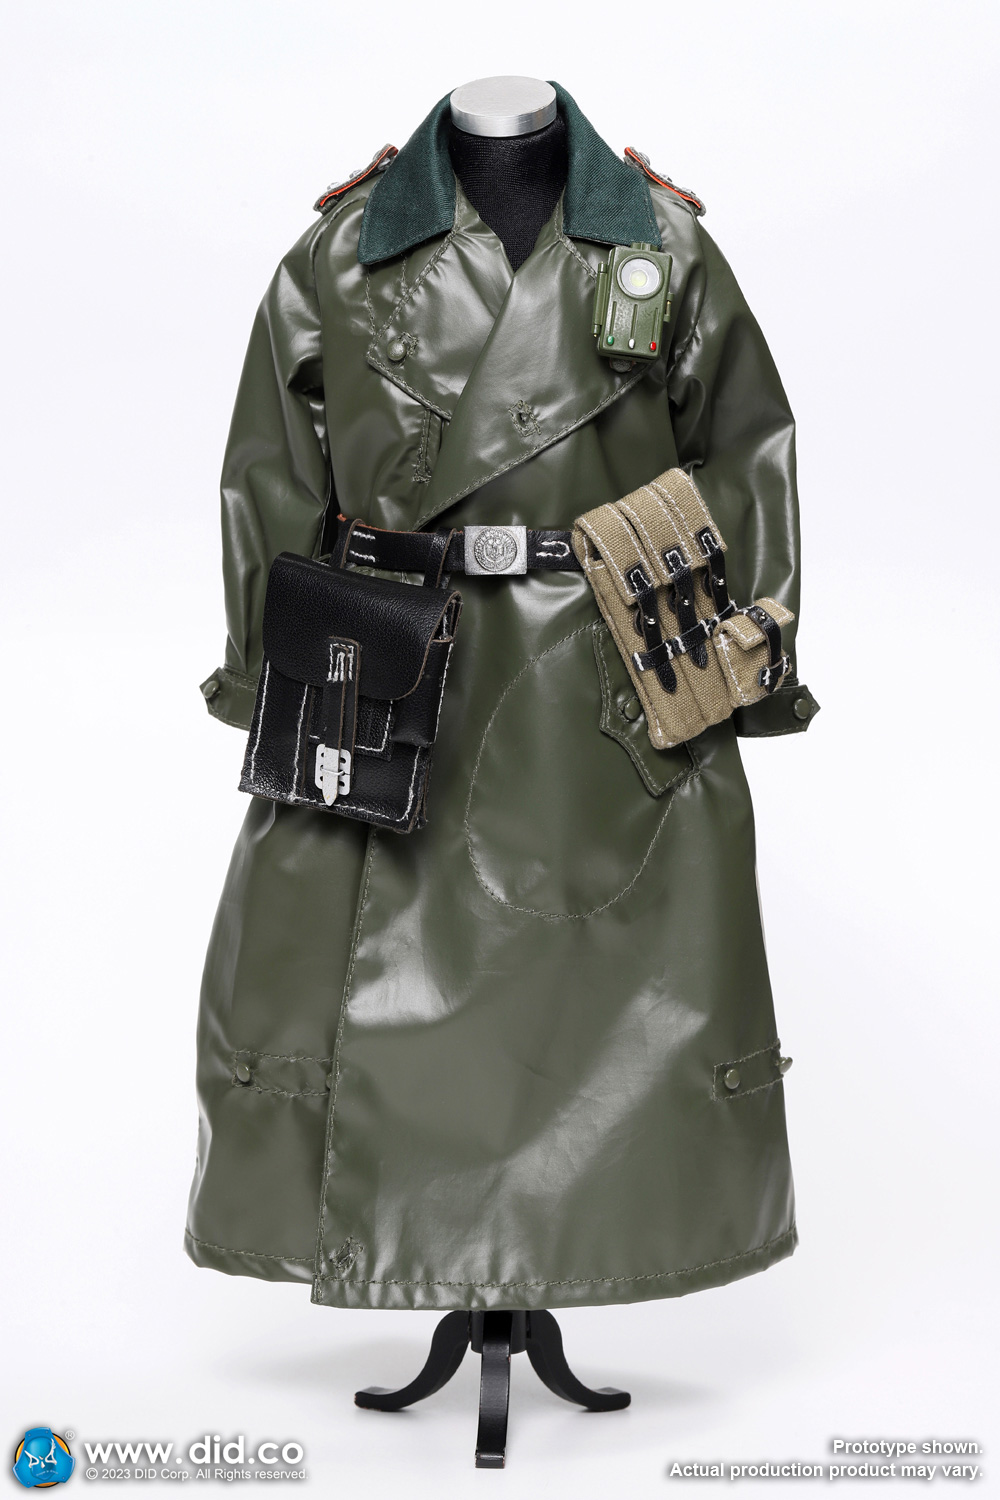 MilitaryPoliceman - NEW PRODUCT: DiD: D80166 WWII German Military Policeman – Richard 1/6 scale action figure 4412